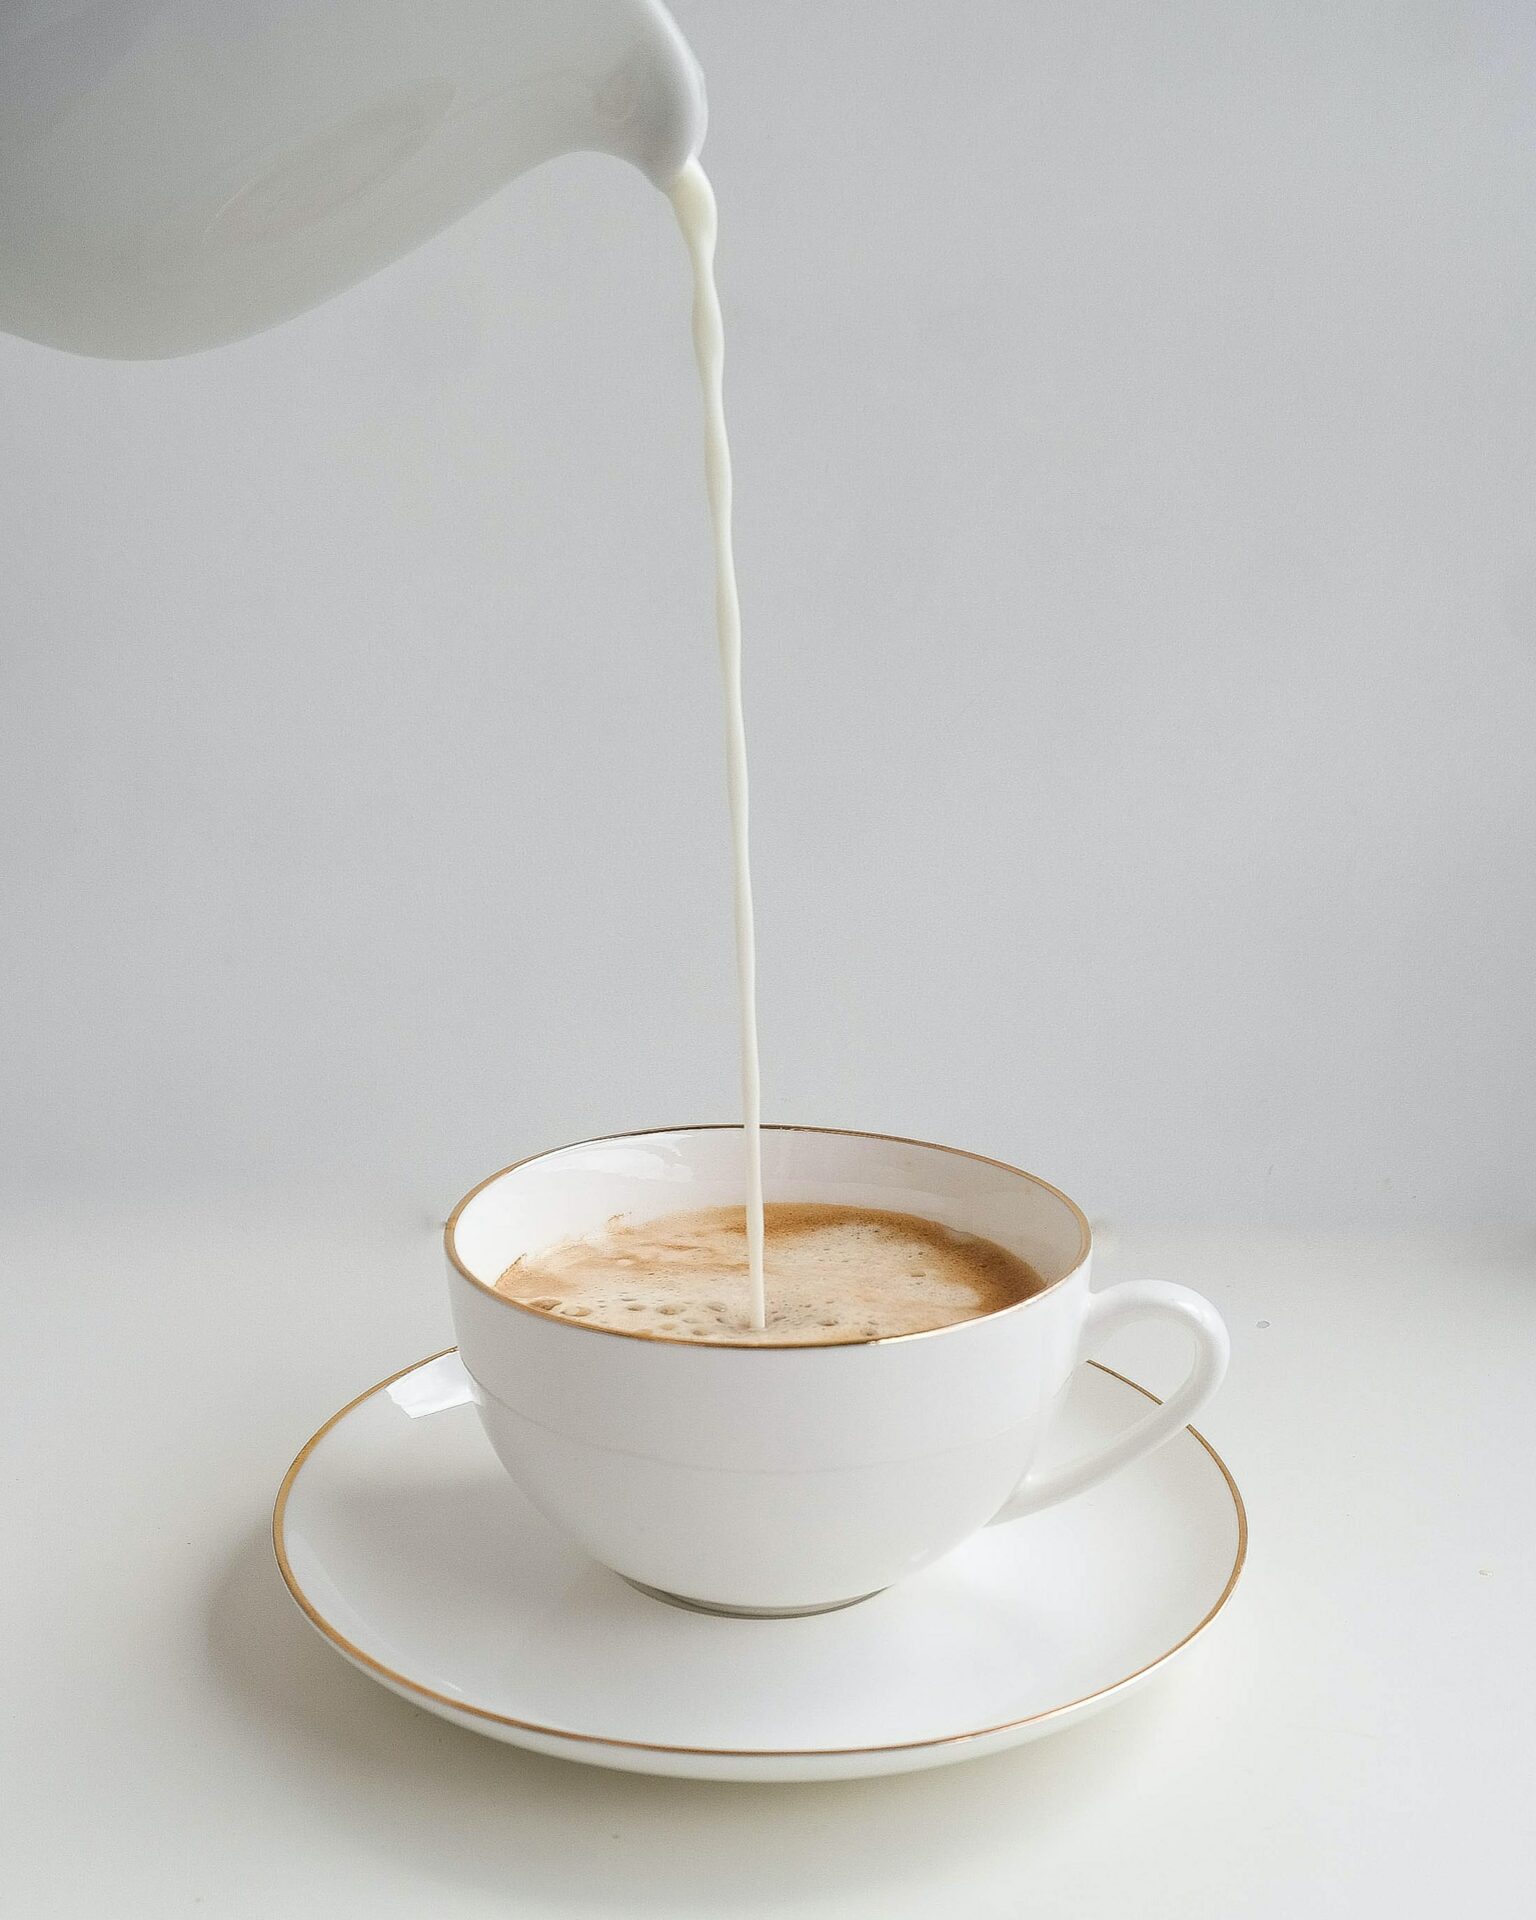 pouring milk into a coffee cup